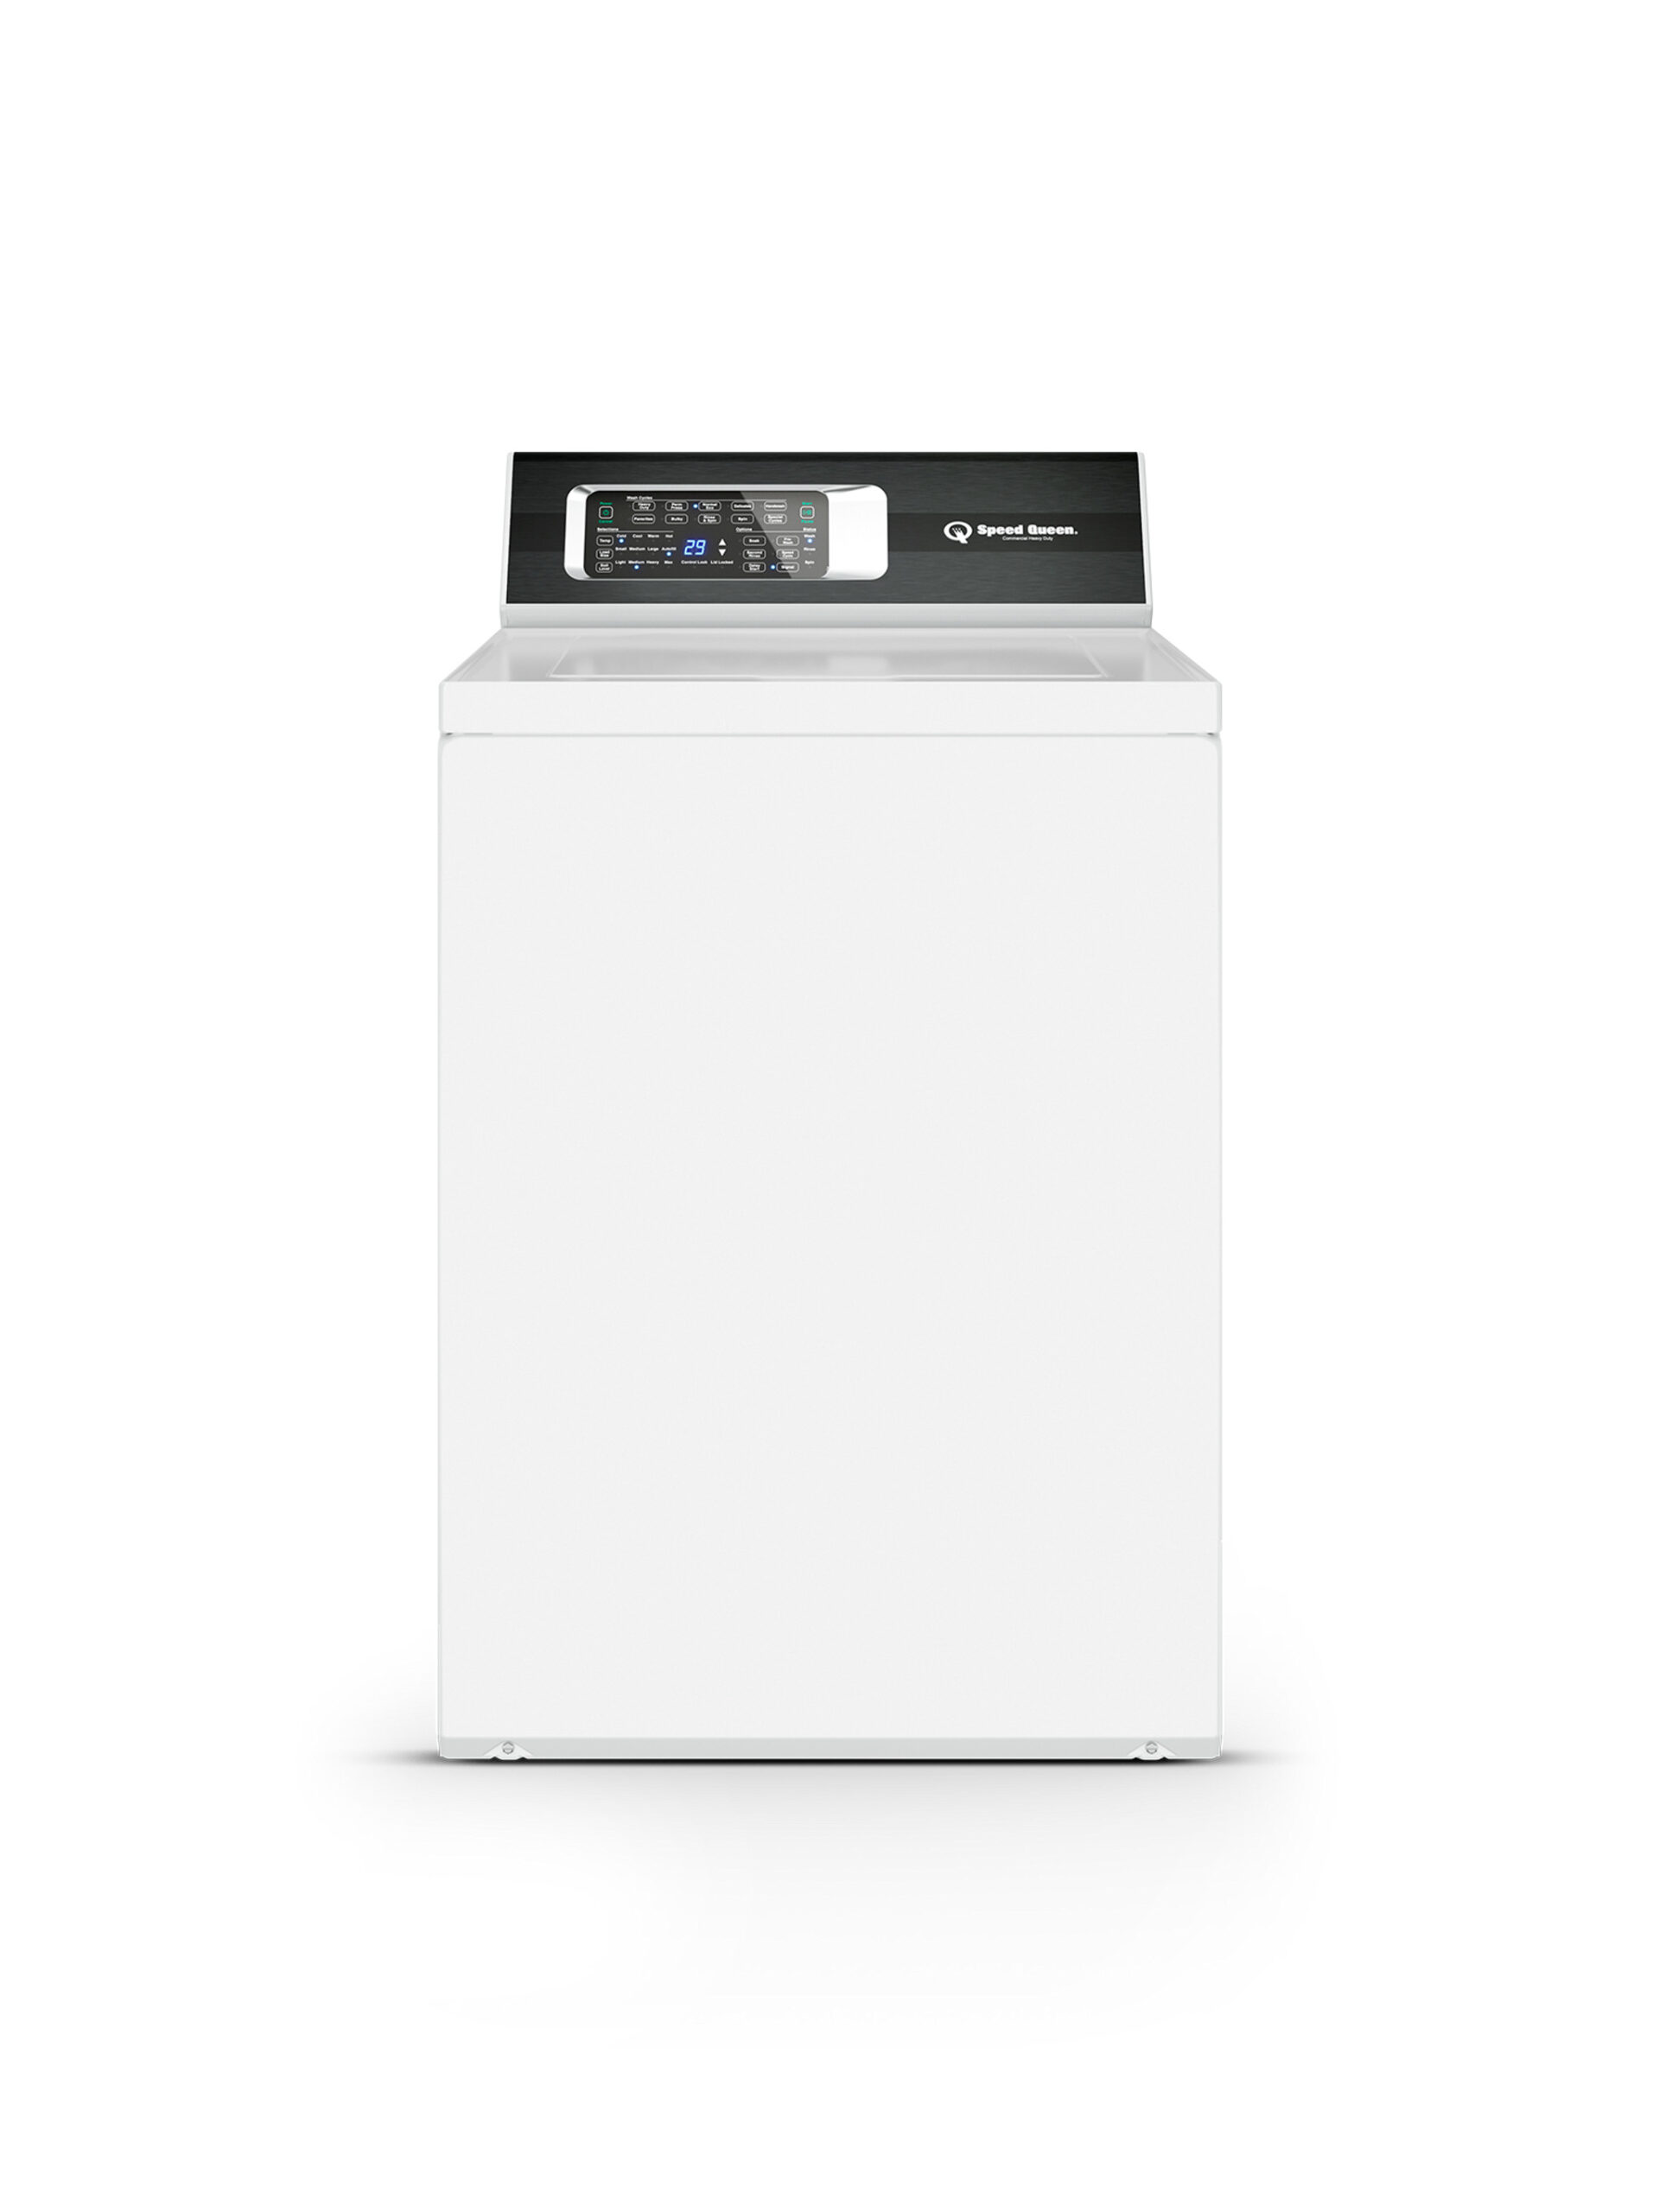 Speed Queen TR7 26 Inch Wide 3.2 Cu. Ft. Top Loading Washing